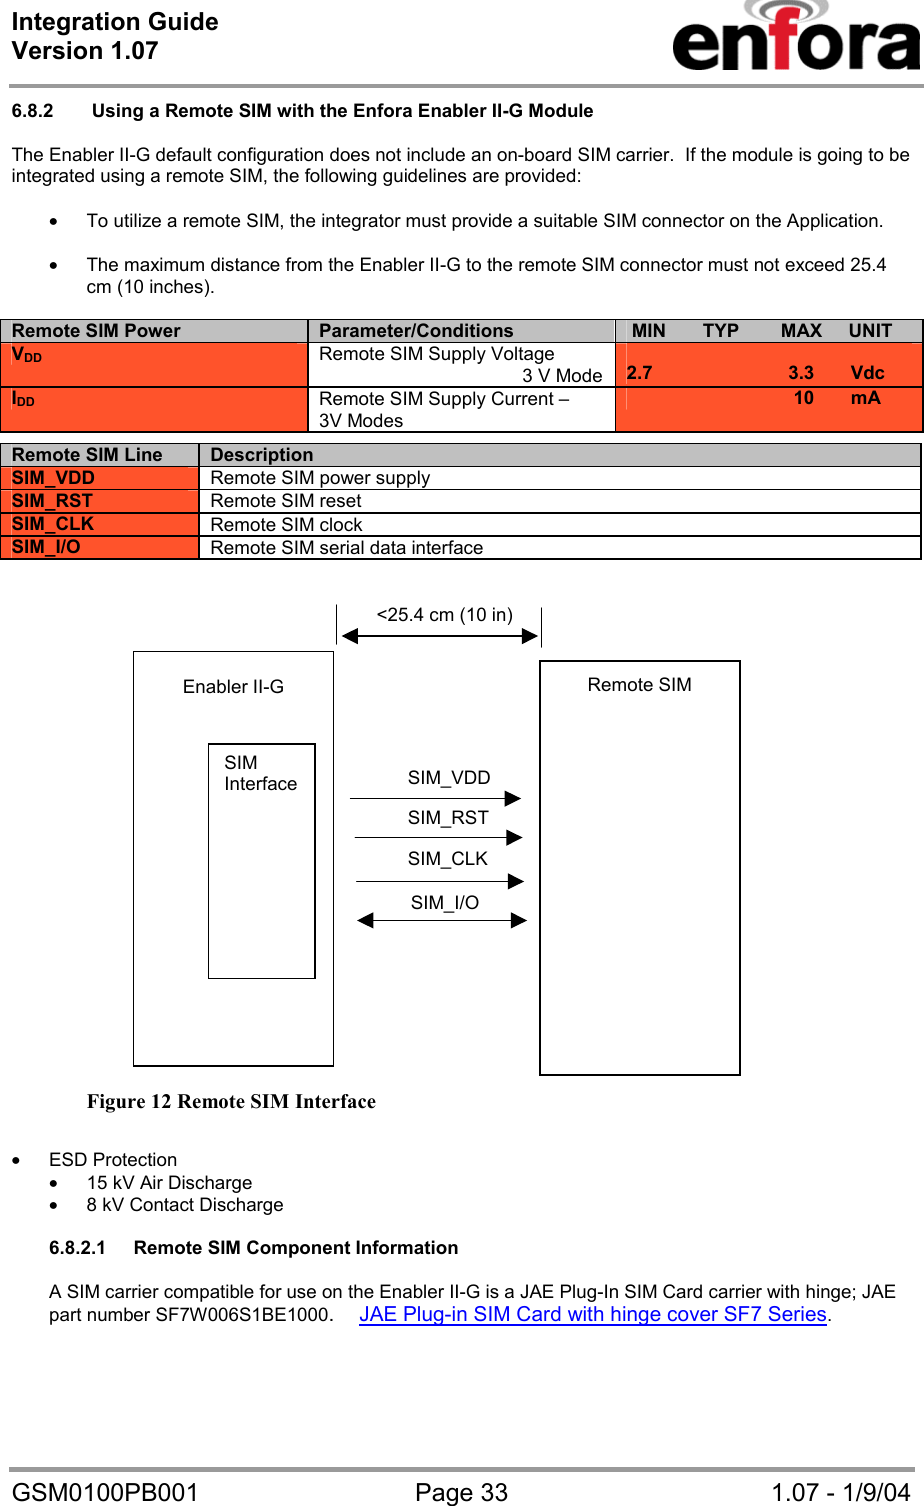 Integration Guide  Version 1.07   GSM0100PB001  Page 33  1.07 - 1/9/04 6.8.2   Using a Remote SIM with the Enfora Enabler II-G Module  The Enabler II-G default configuration does not include an on-board SIM carrier.  If the module is going to be integrated using a remote SIM, the following guidelines are provided:  • To utilize a remote SIM, the integrator must provide a suitable SIM connector on the Application.  • The maximum distance from the Enabler II-G to the remote SIM connector must not exceed 25.4 cm (10 inches).  Remote SIM Power Parameter/Conditions  MIN       TYP        MAX     UNIT VDD  Remote SIM Supply Voltage                                        3 V Mode  2.7                          3.3       Vdc        IDD Remote SIM Supply Current –  3V Modes                                 10       mA                           Figure 12 Remote SIM Interface  • ESD Protection • 15 kV Air Discharge • 8 kV Contact Discharge  6.8.2.1  Remote SIM Component Information  A SIM carrier compatible for use on the Enabler II-G is a JAE Plug-In SIM Card carrier with hinge; JAE part number SF7W006S1BE1000.JAE Plug-in SIM Card with hinge cover SF7 Series.   Remote SIM Line Description SIM_VDD Remote SIM power supply SIM_RST  Remote SIM reset SIM_CLK  Remote SIM clock SIM_I/O  Remote SIM serial data interface SIM_CLK&lt;25.4 cm (10 in)SIM_I/OSIM_RSTSIM_VDDEnabler II-G SIM Interface Remote SIM 